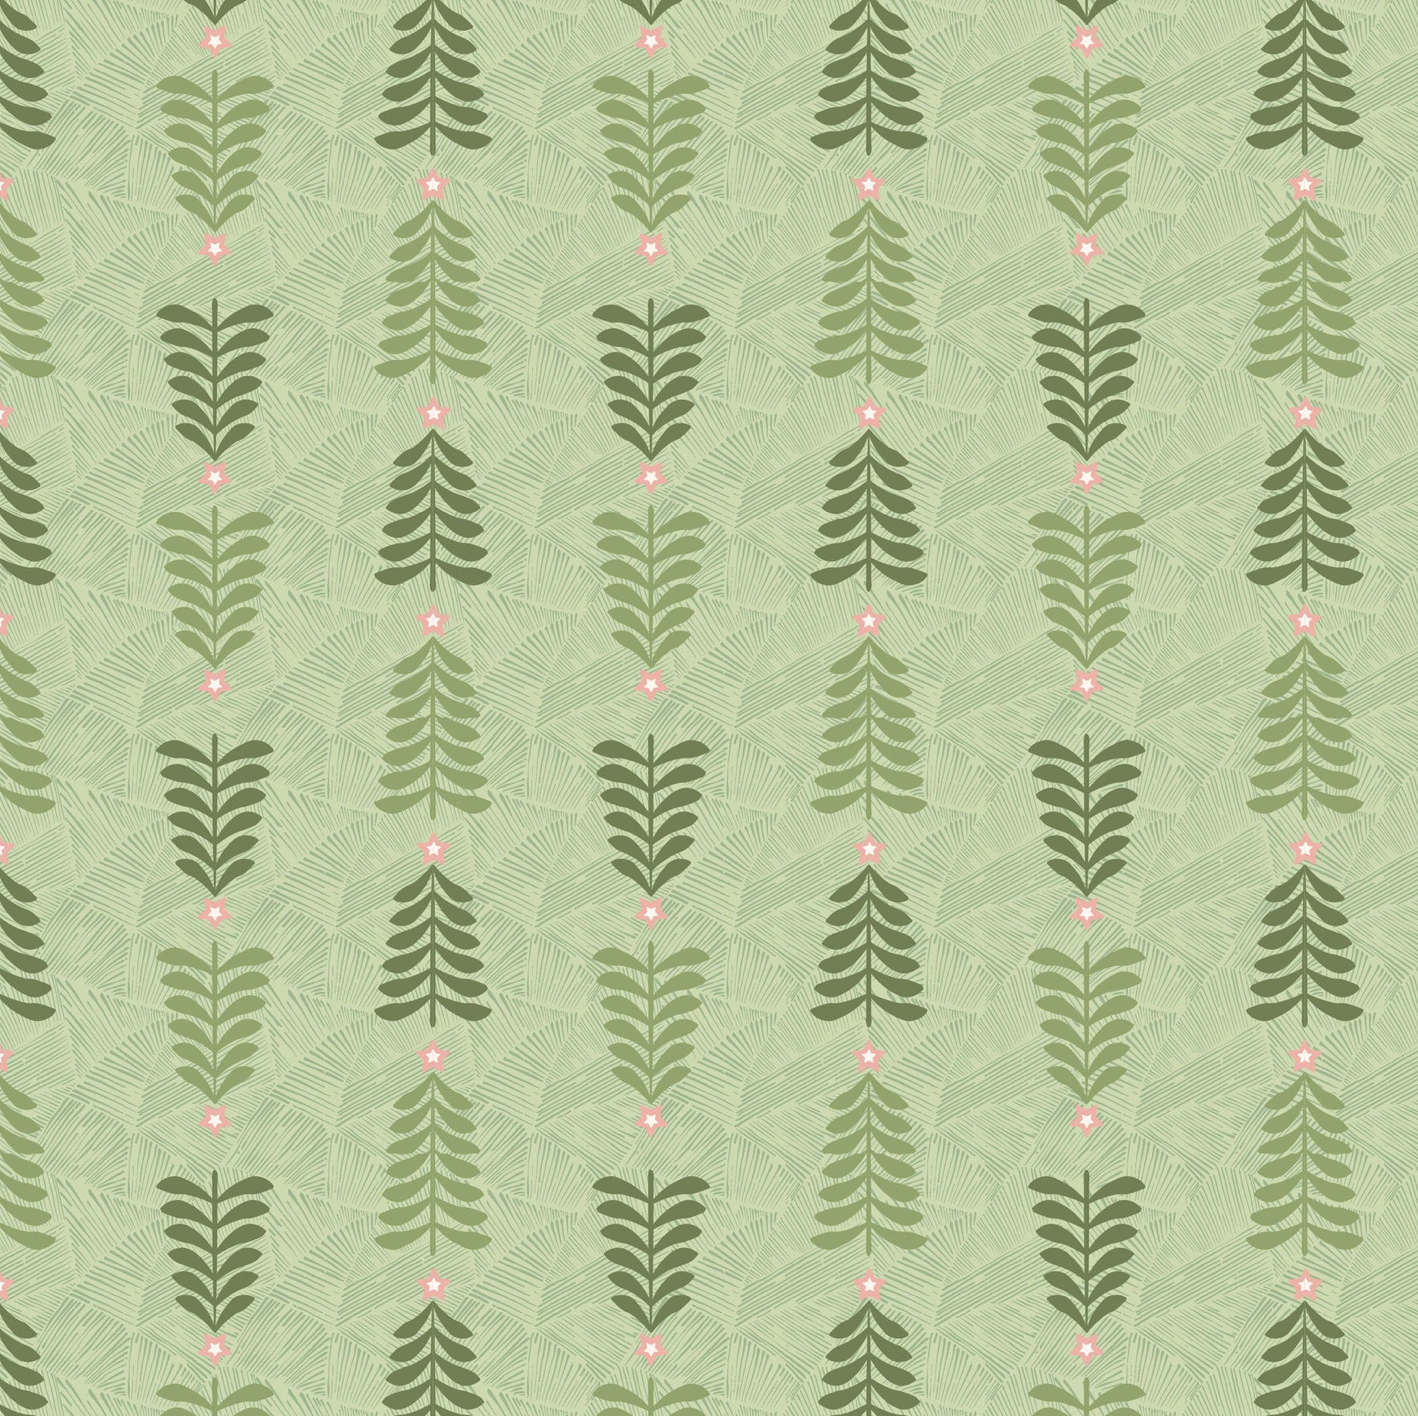 Prairie Christmas, Oh Christmas Tree Green, PC24353, sold by the 1/2 yard, *PREORDER